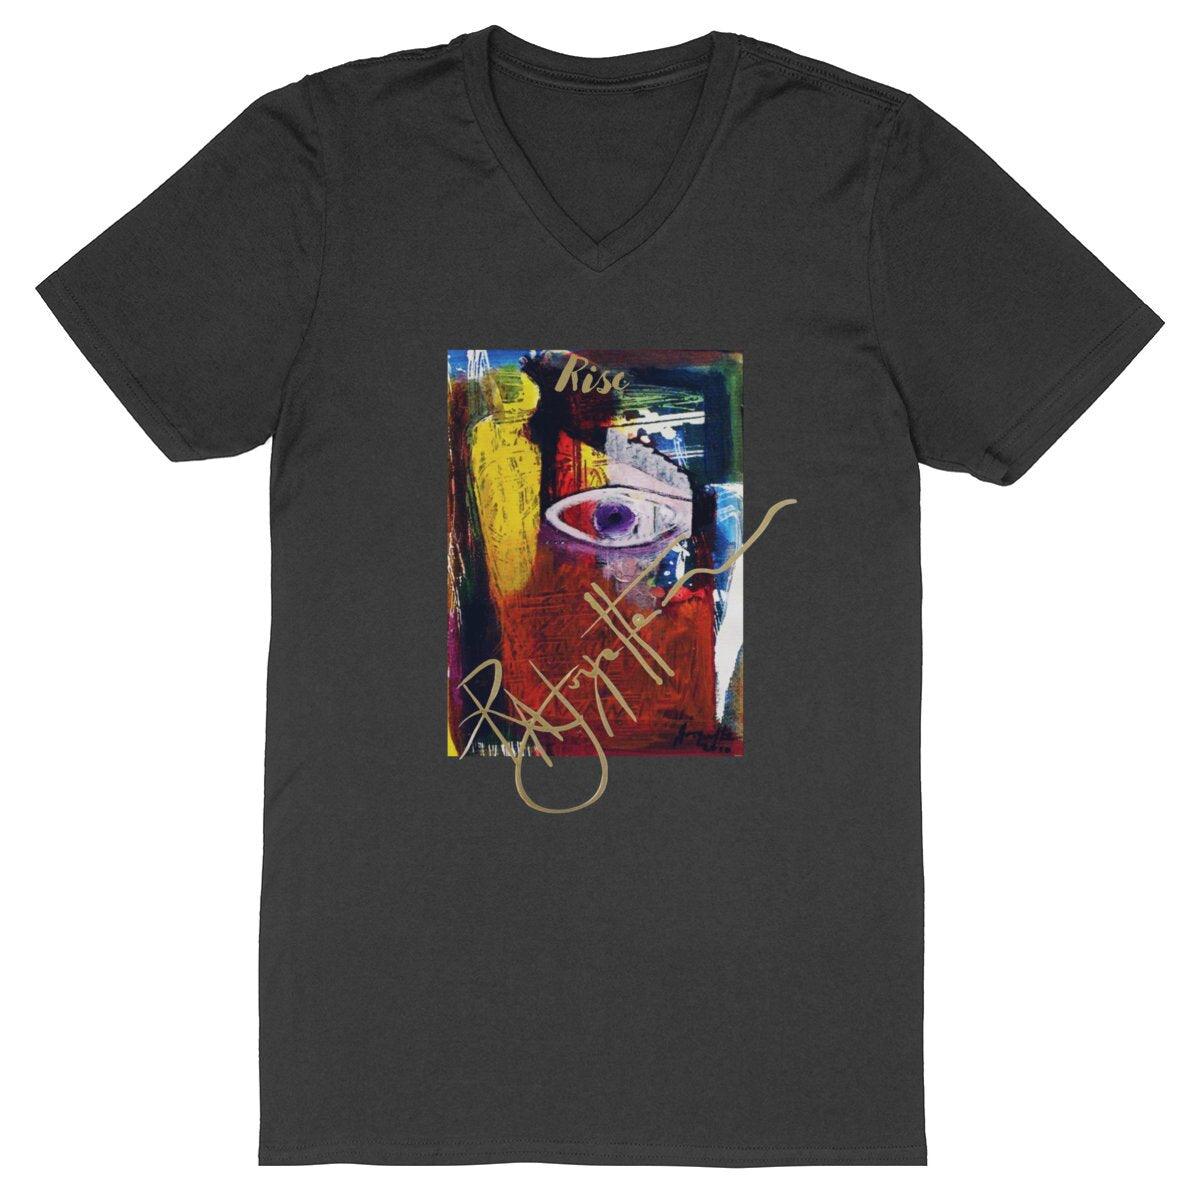 Rise! Dedication to Haiti Earthquake Disaster Men's V-Neck 100% Cotton Change T-shirt by Tree of Life Art, supporting recovery with a stylish and meaningful design.